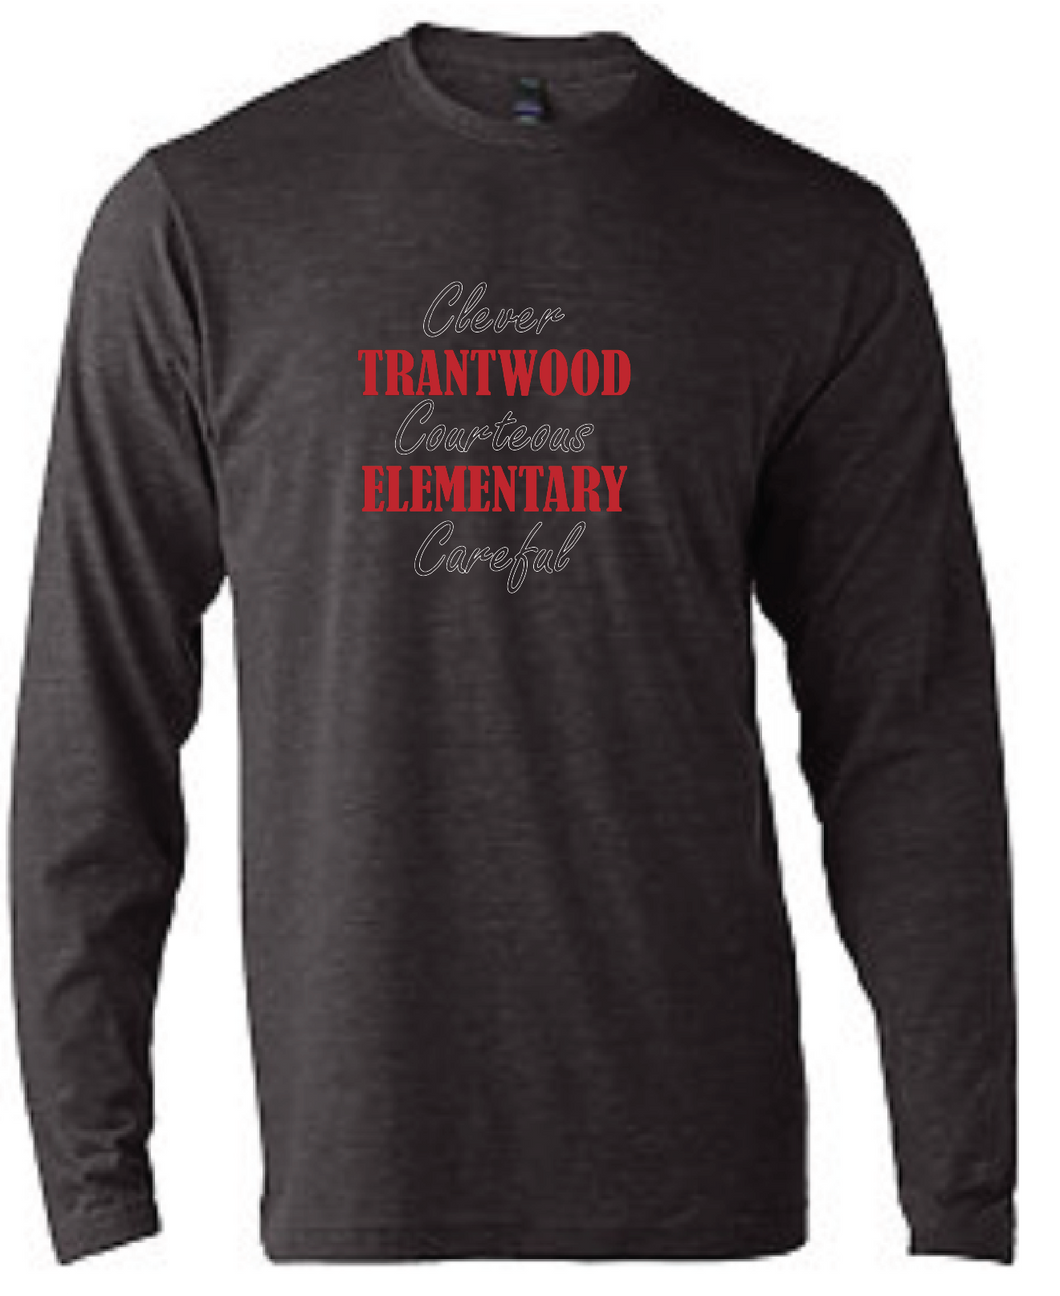 Perfect Tri Long Sleeve Tee / Black Frost / Trantwood Elementary